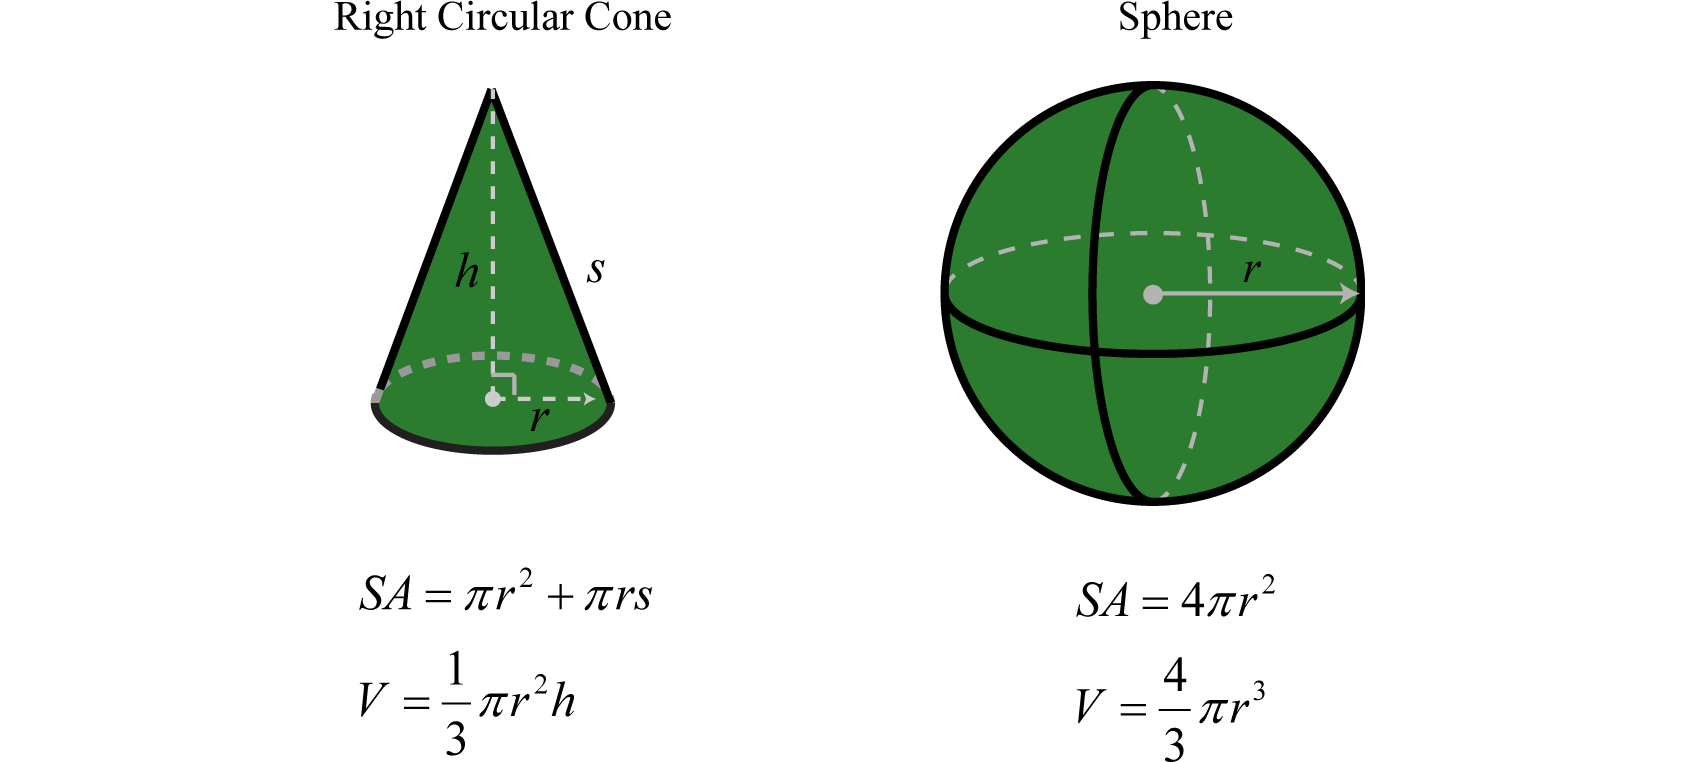 Right circular cone and sphere formulas for volume and surface area